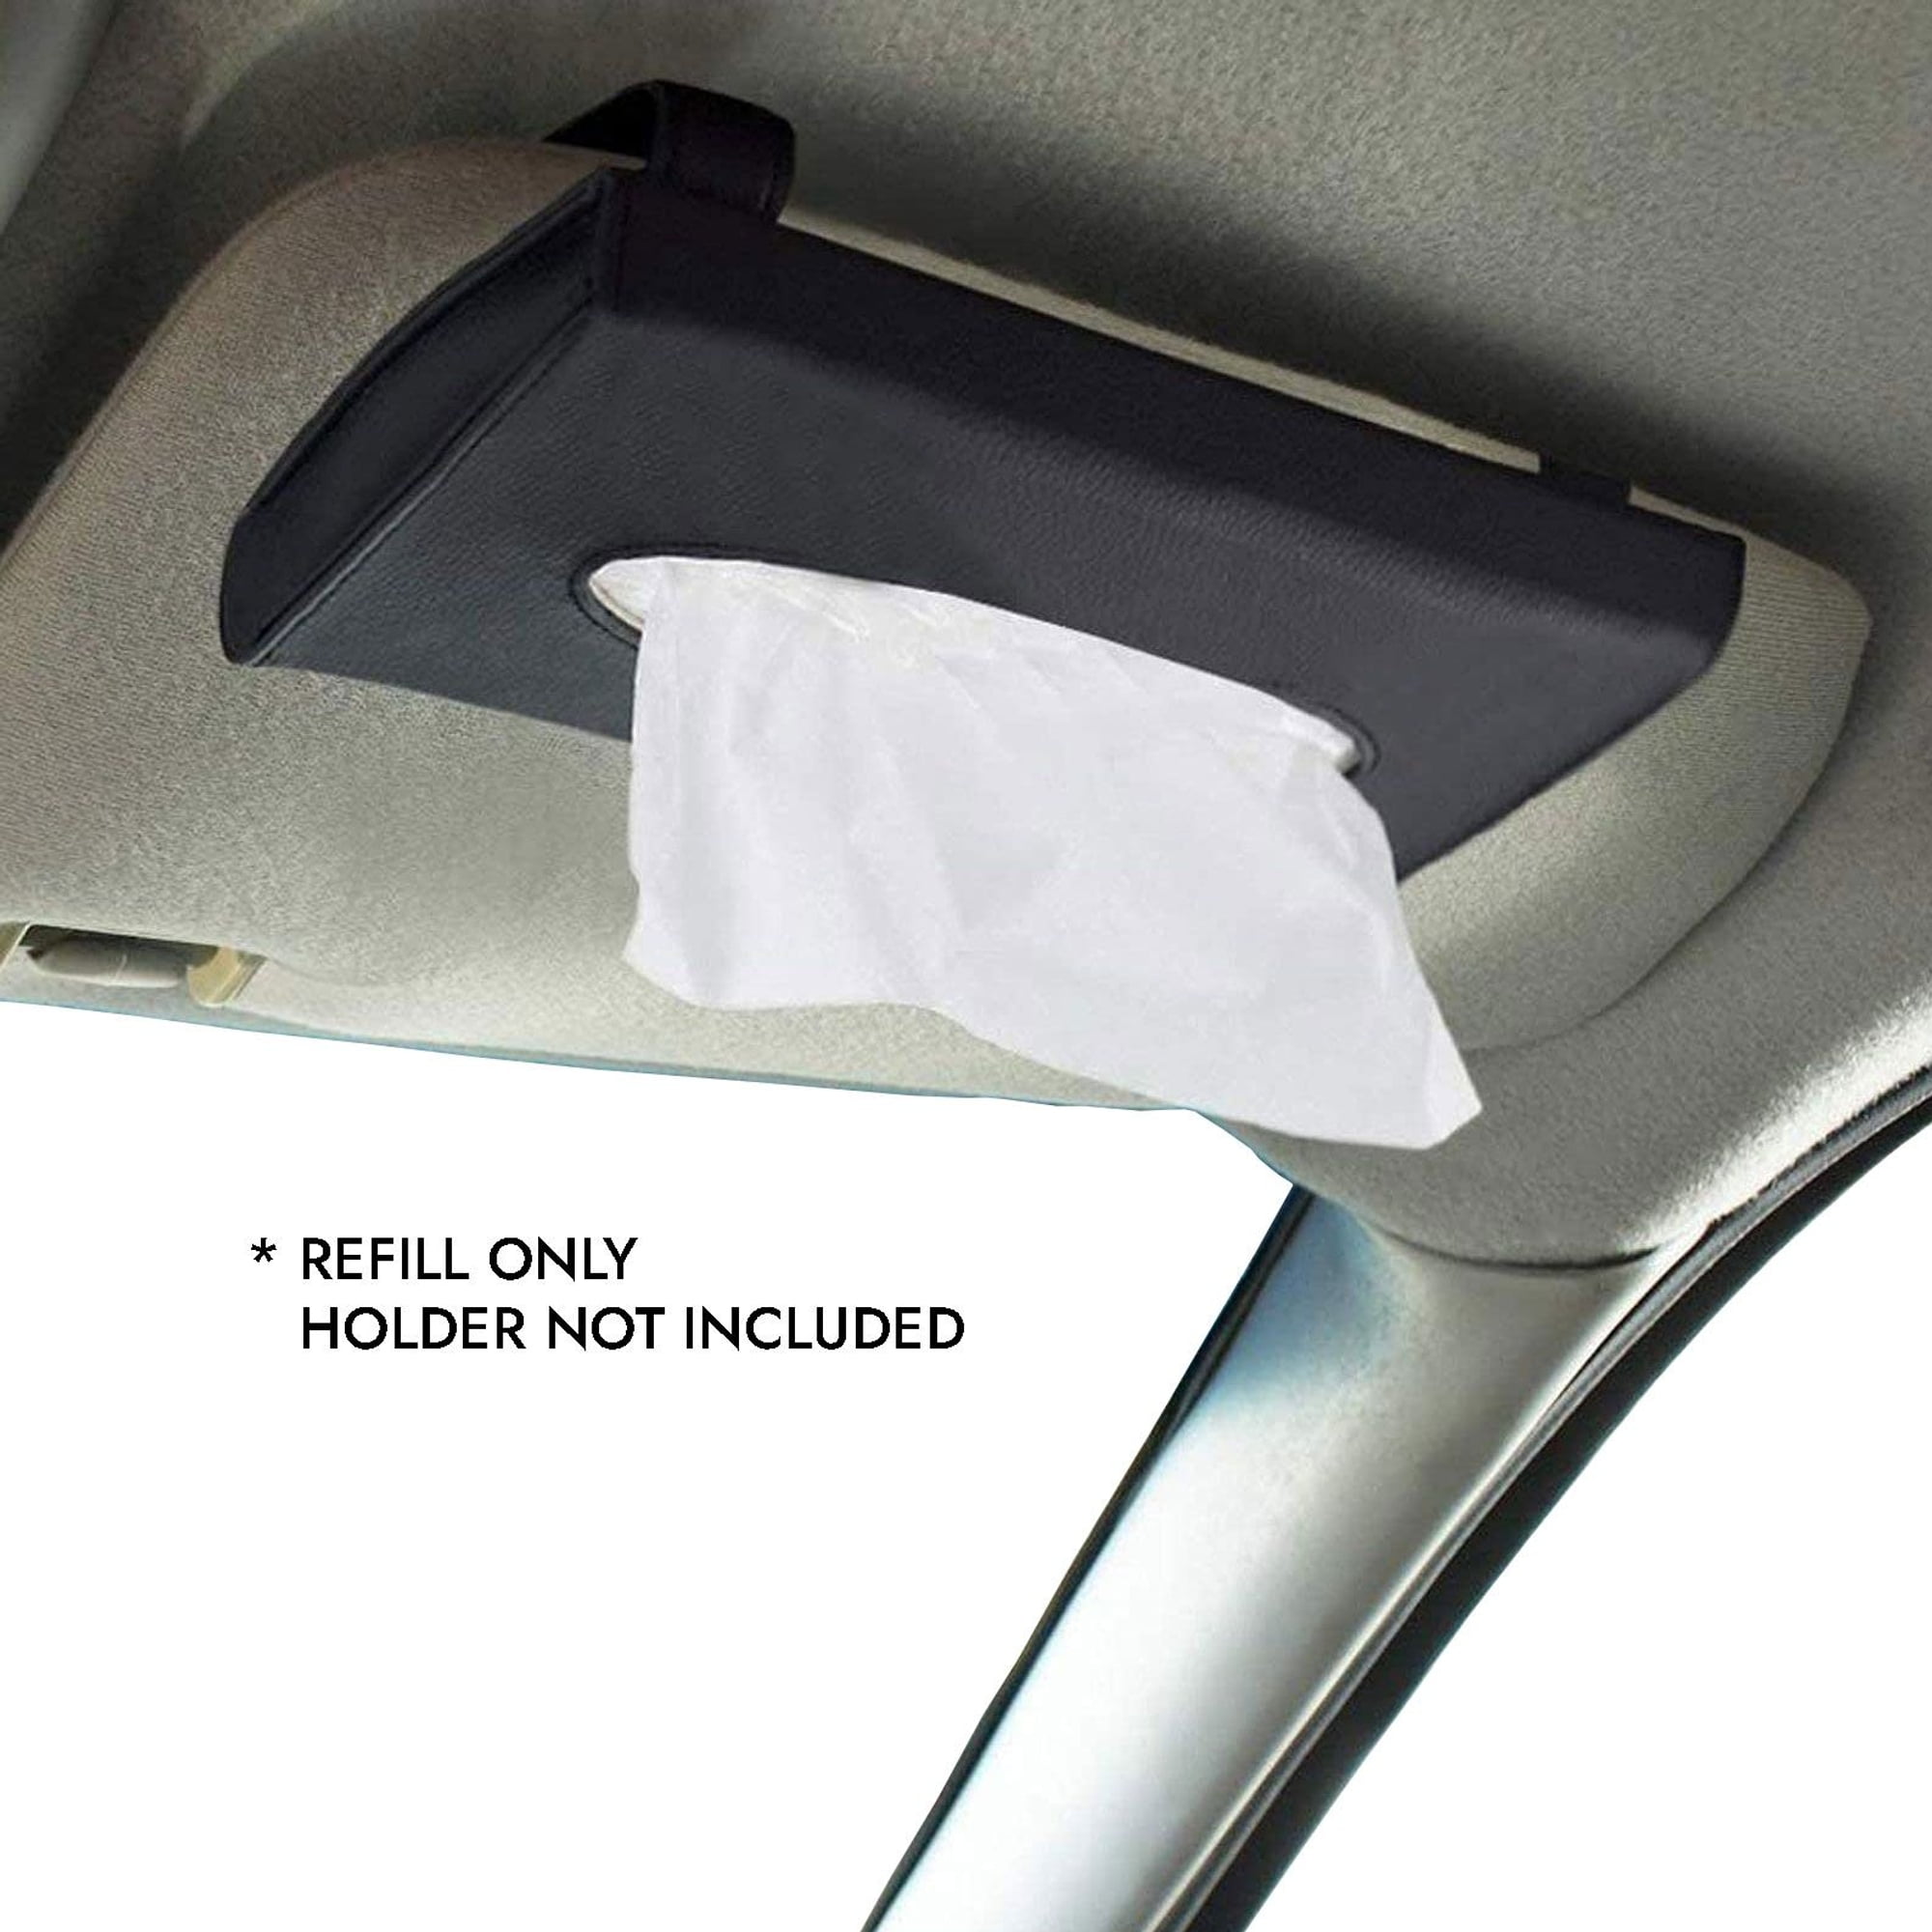 36 Pack of Car Tissues Refills, 864 Sheets of Facial Tissues for Auto Sun  Visor Holder, 24 Sheets Each, 3-Ply (8 x 4 In) 